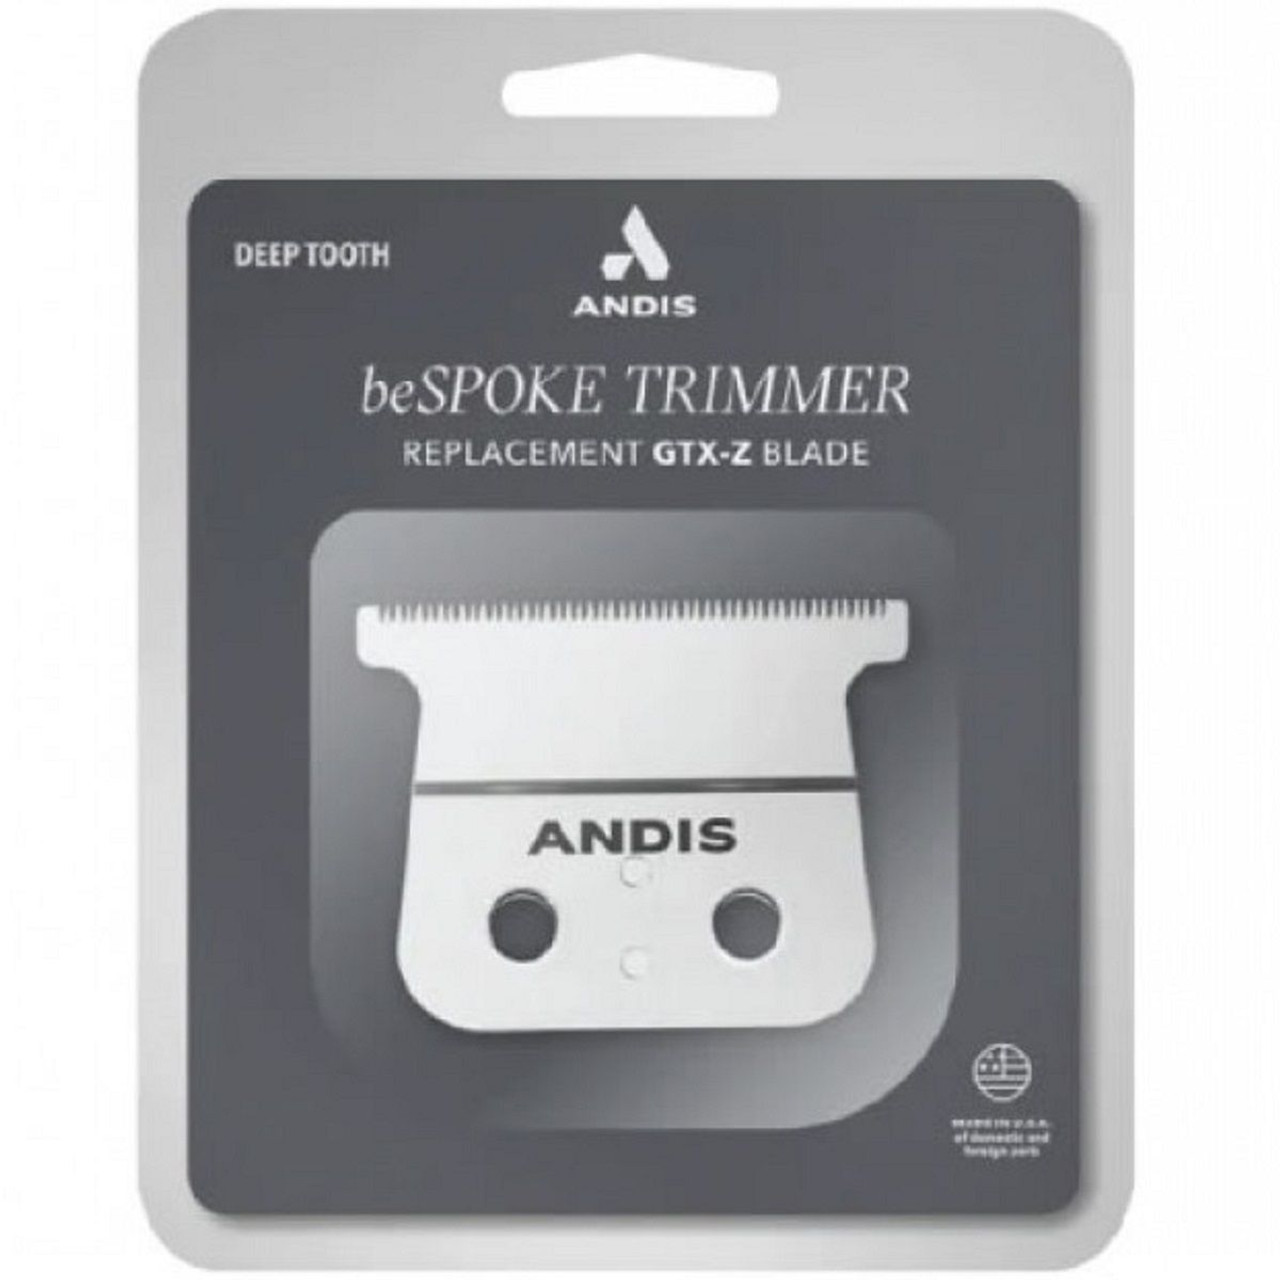 Portable Trimmer Replacement Blades